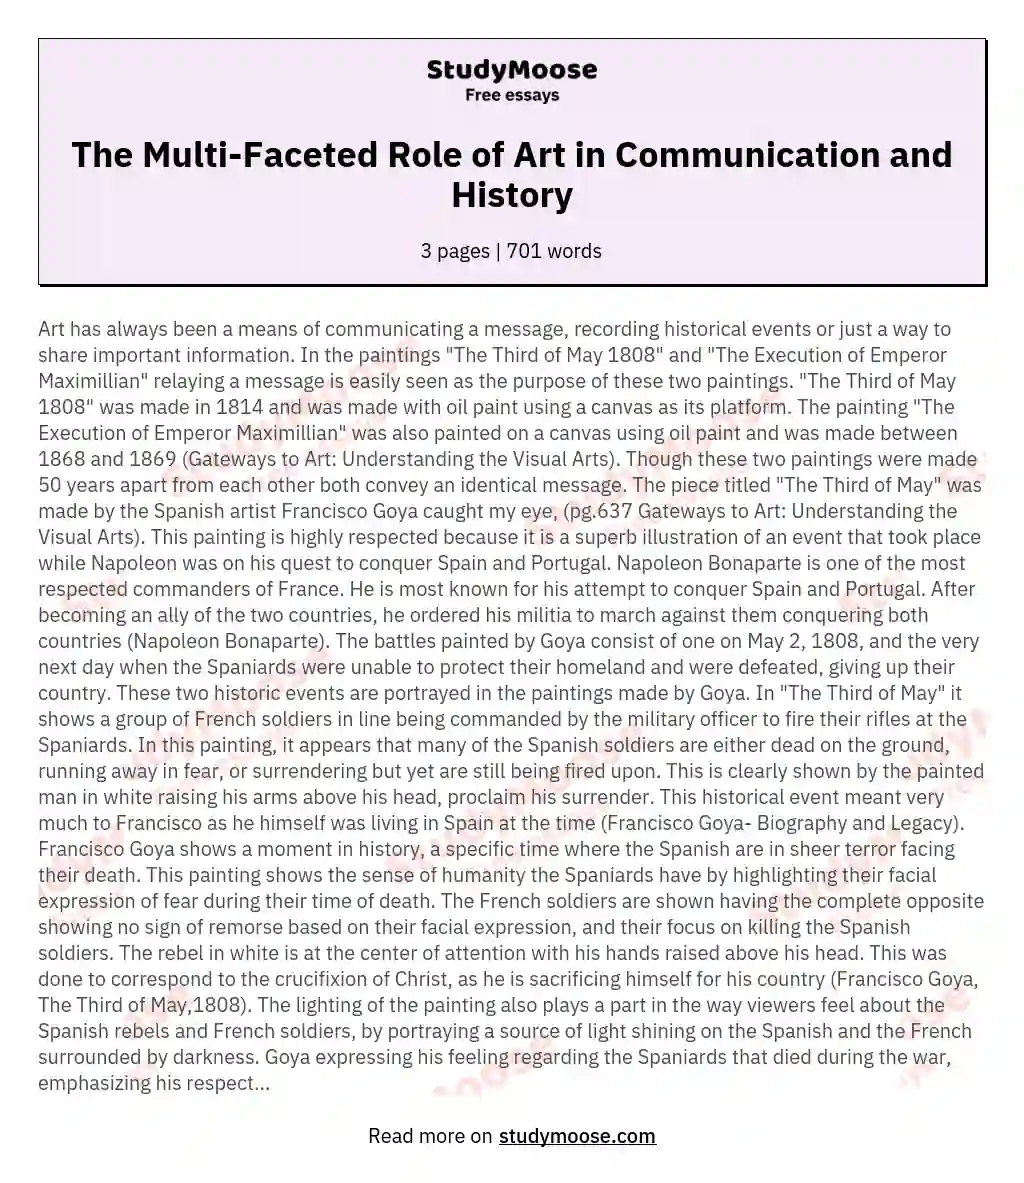 The Multi-Faceted Role of Art in Communication and History essay